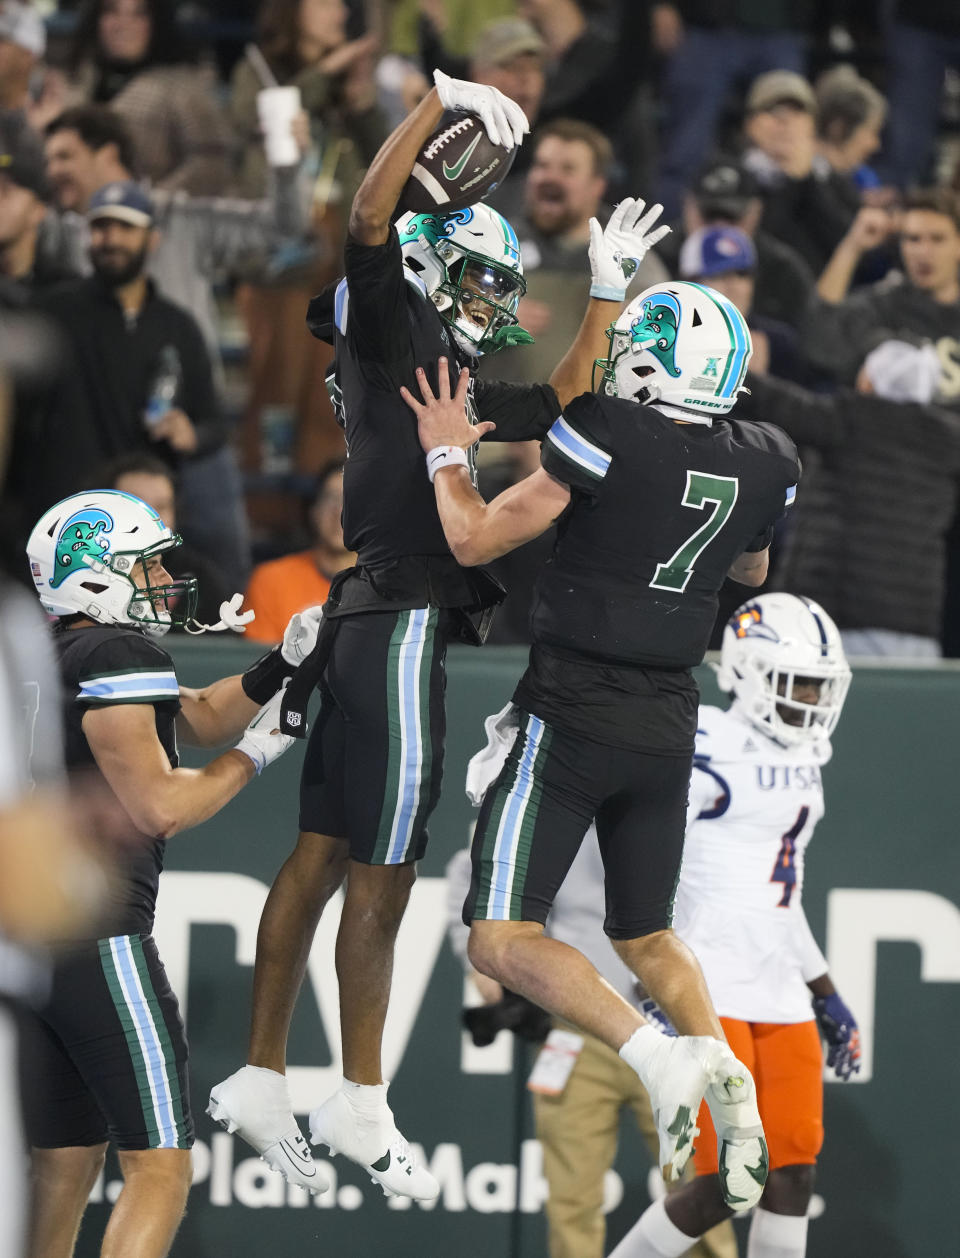 Tulane wide receiver Chris Brazzell II celebrates his touchdown reception with quarterback Michael Pratt (7) in the second half of an NCAA college football game against UTSA in New Orleans, Friday, Nov. 24, 2023. Tulane won 29-16. (AP Photo/Gerald Herbert)